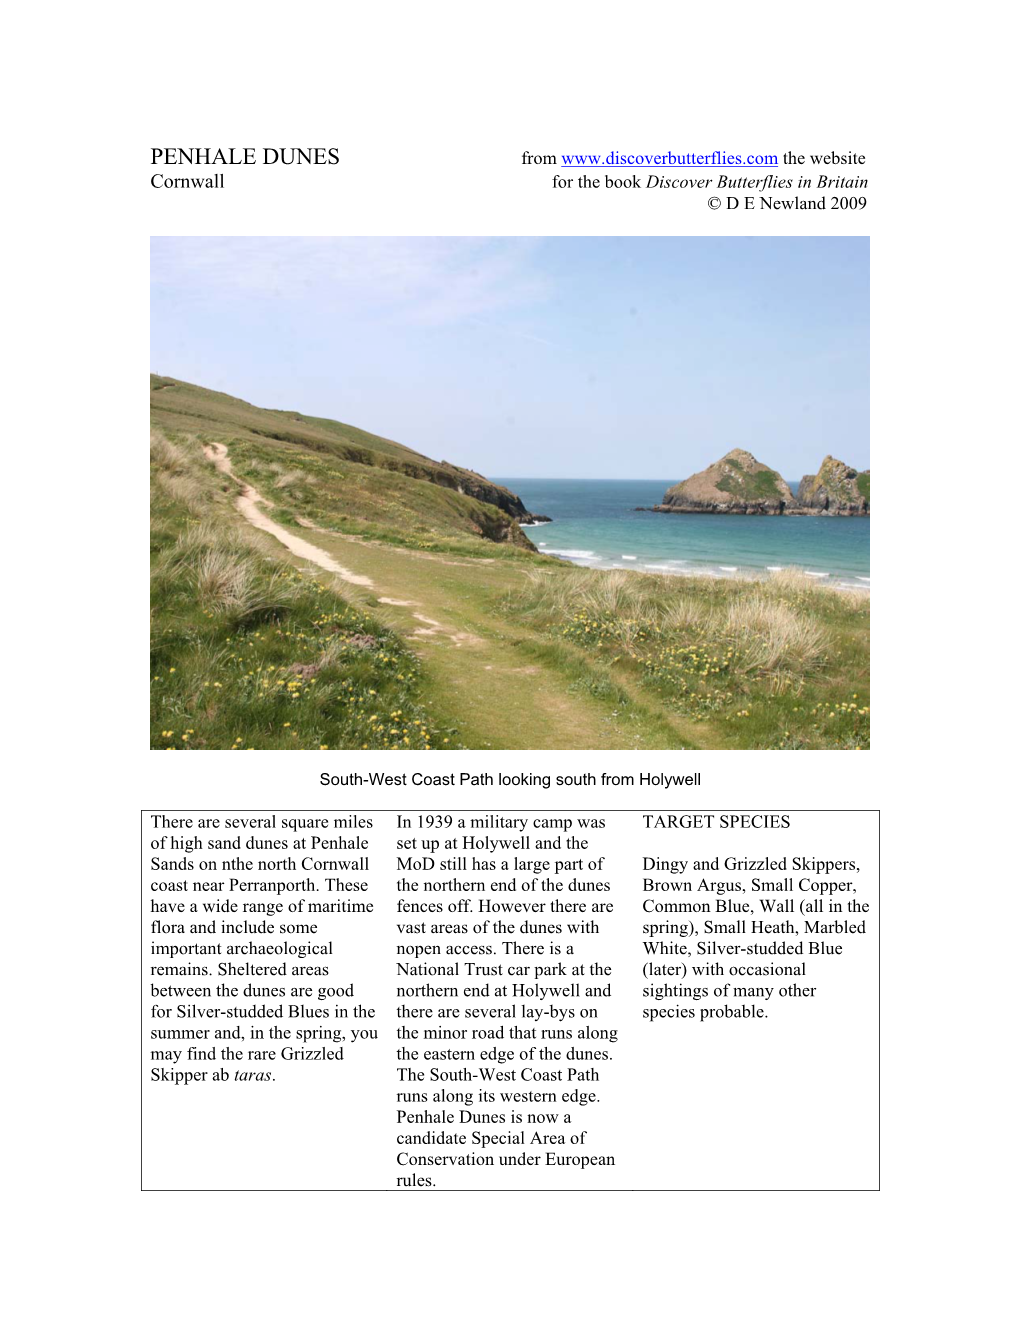 PENHALE DUNES from the Website Cornwall for the Book Discover Butterflies in Britain © D E Newland 2009